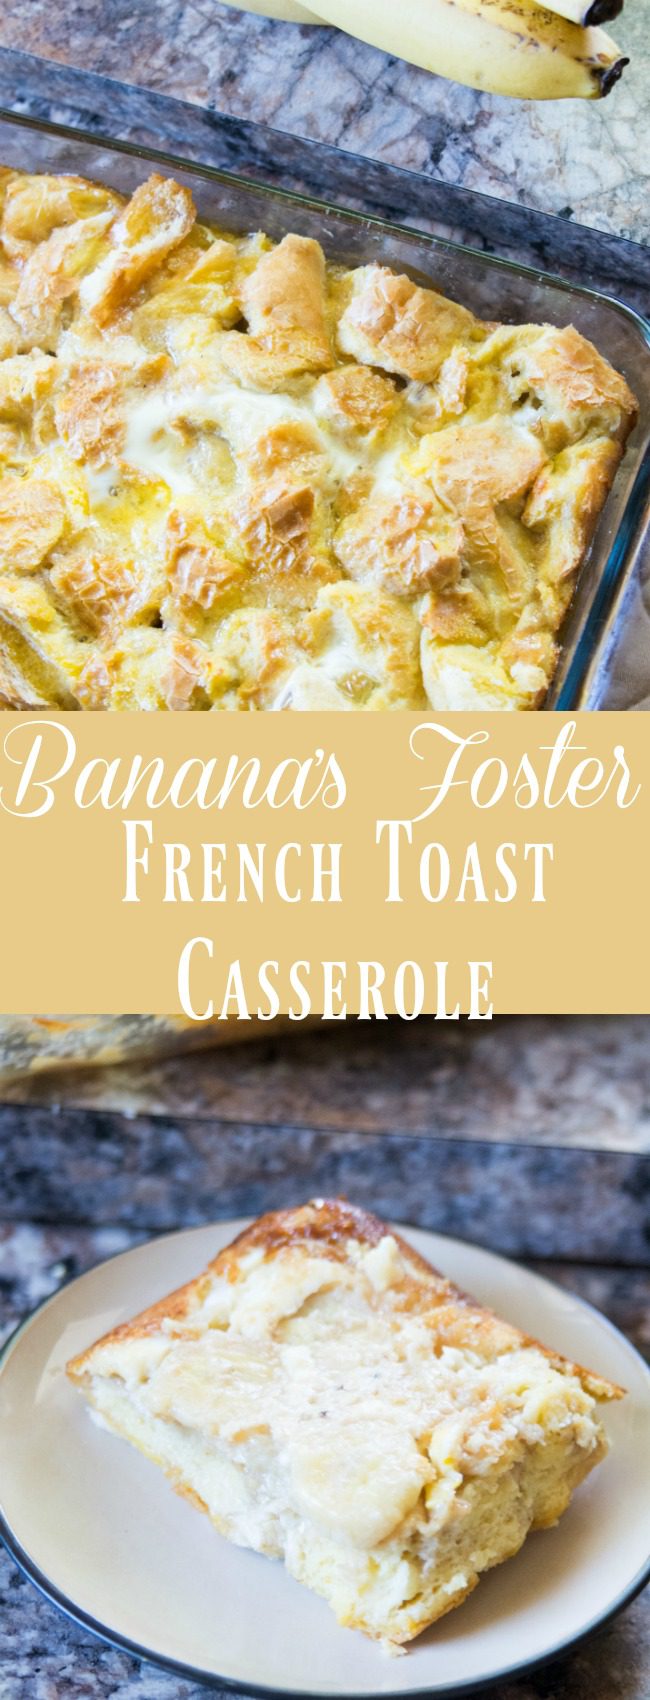 This overnight banana's french toast casserole recipe is DELICIOUS and EASY! Perfect for the holidays. 